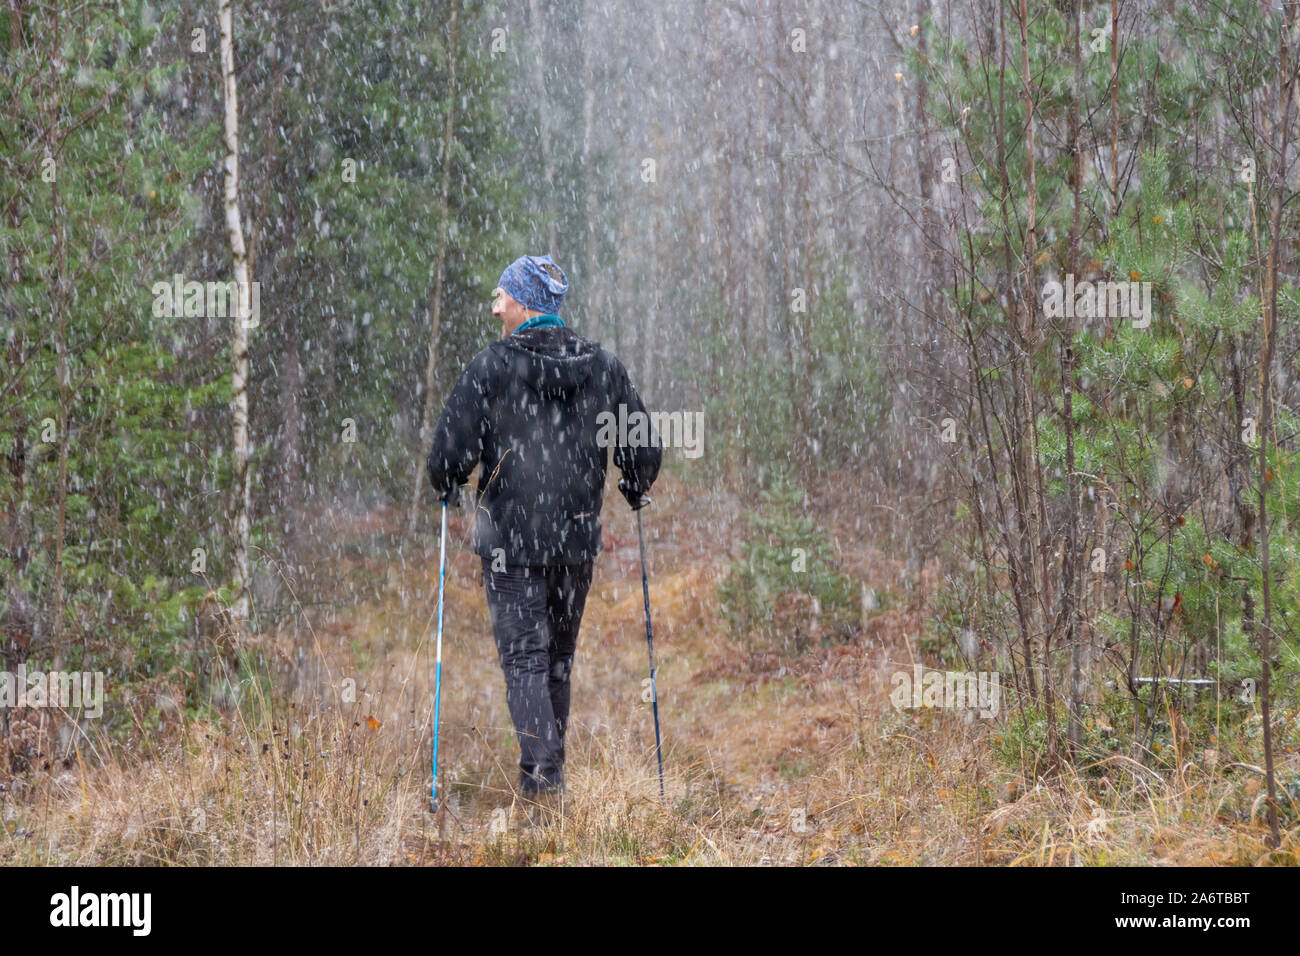 A man on a walk with walking sticks in a snowfall Stock Photo